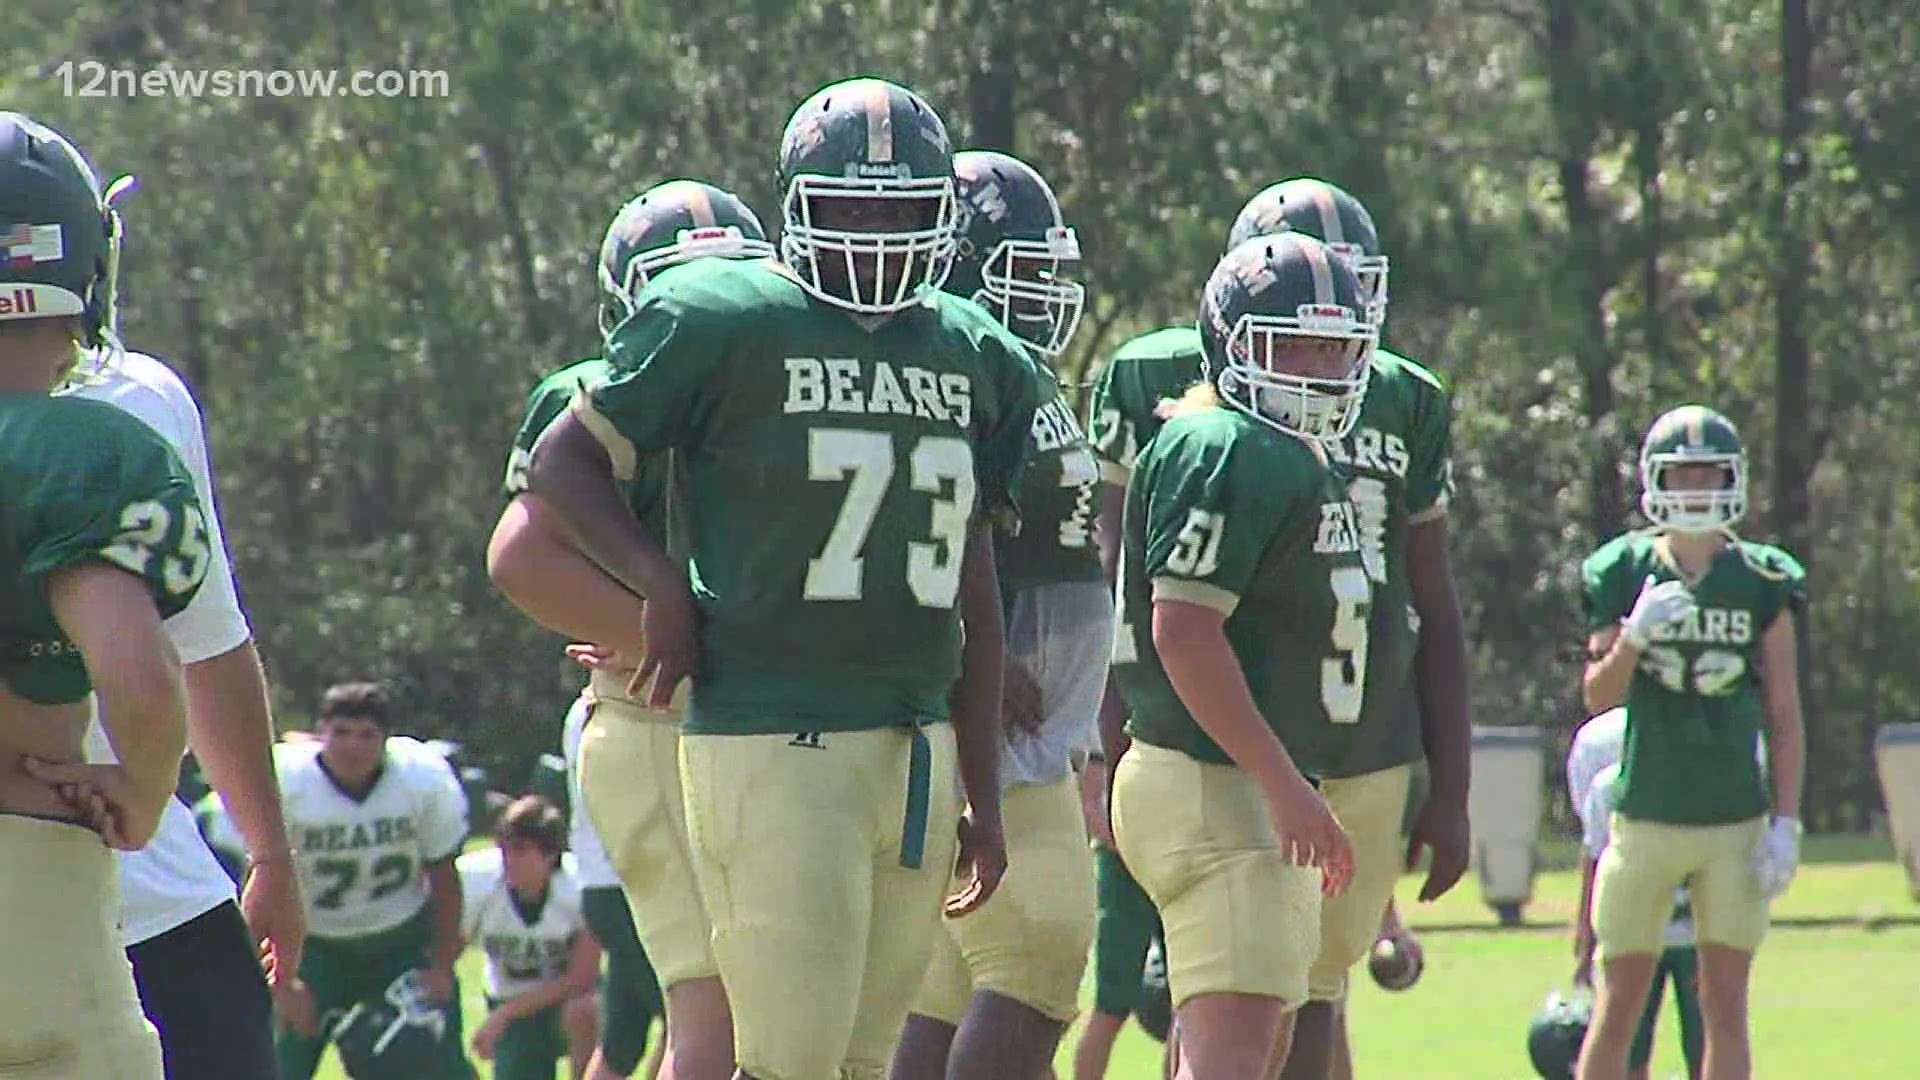 Battlin' Bears are heading north for the 409Sports Blitz Game of The Week